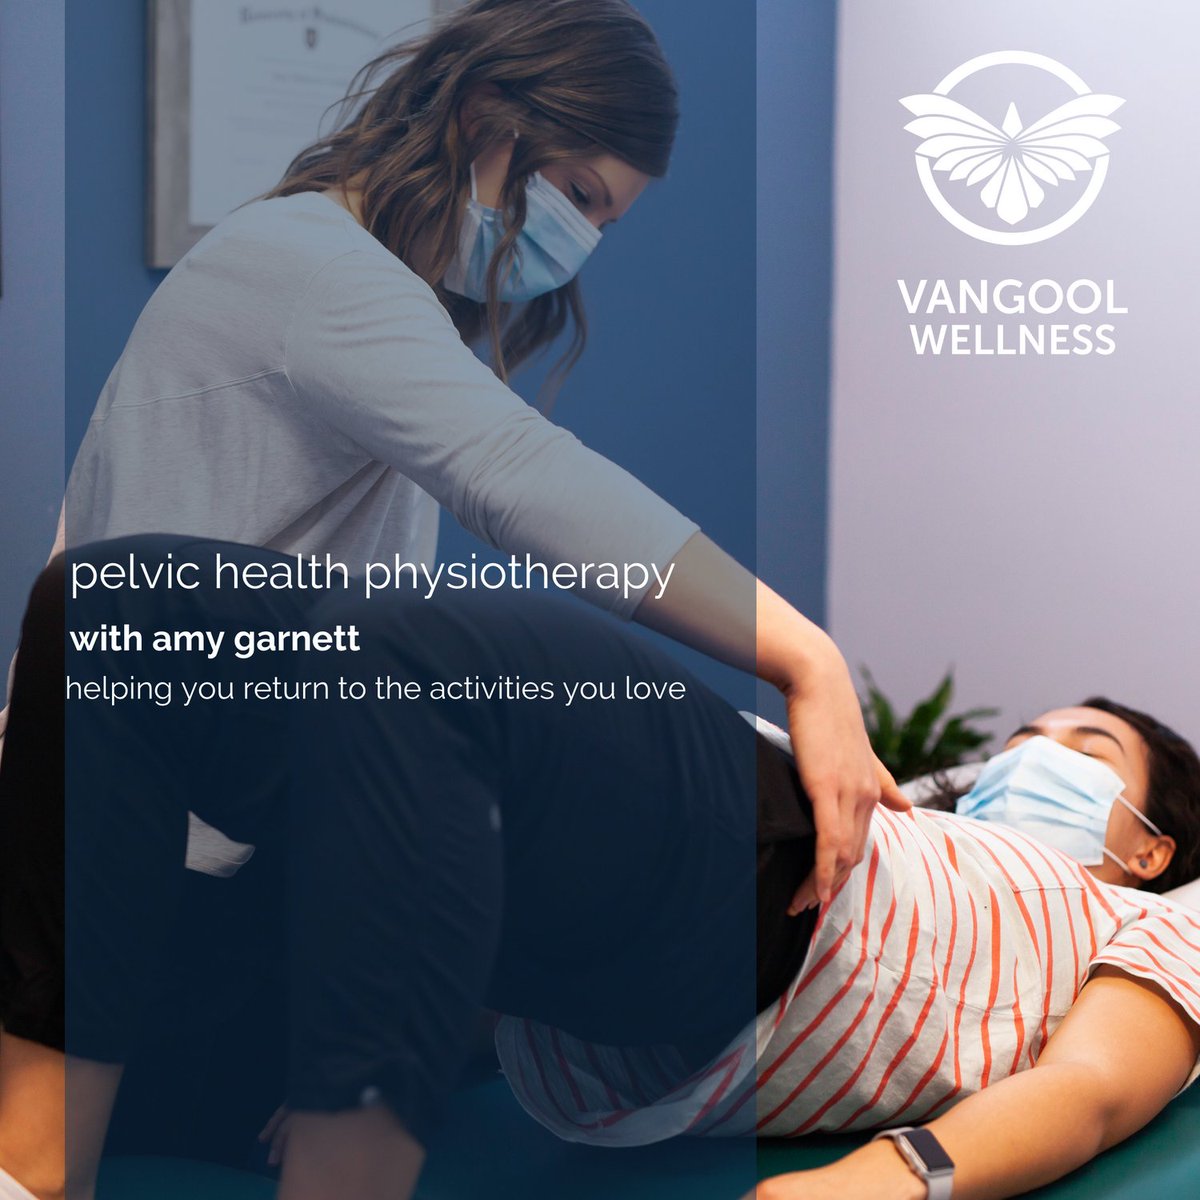 Pelvic Healthy Physiotherapy

Helping you return to the activities you love.

vangoolwellness.com

#pelvic #pelvichealth #pelvichealthphysio #pelvichealthphysiotherapy #physio #physiotherapy #yxe #saskatoon #wellness #vangoolwellness